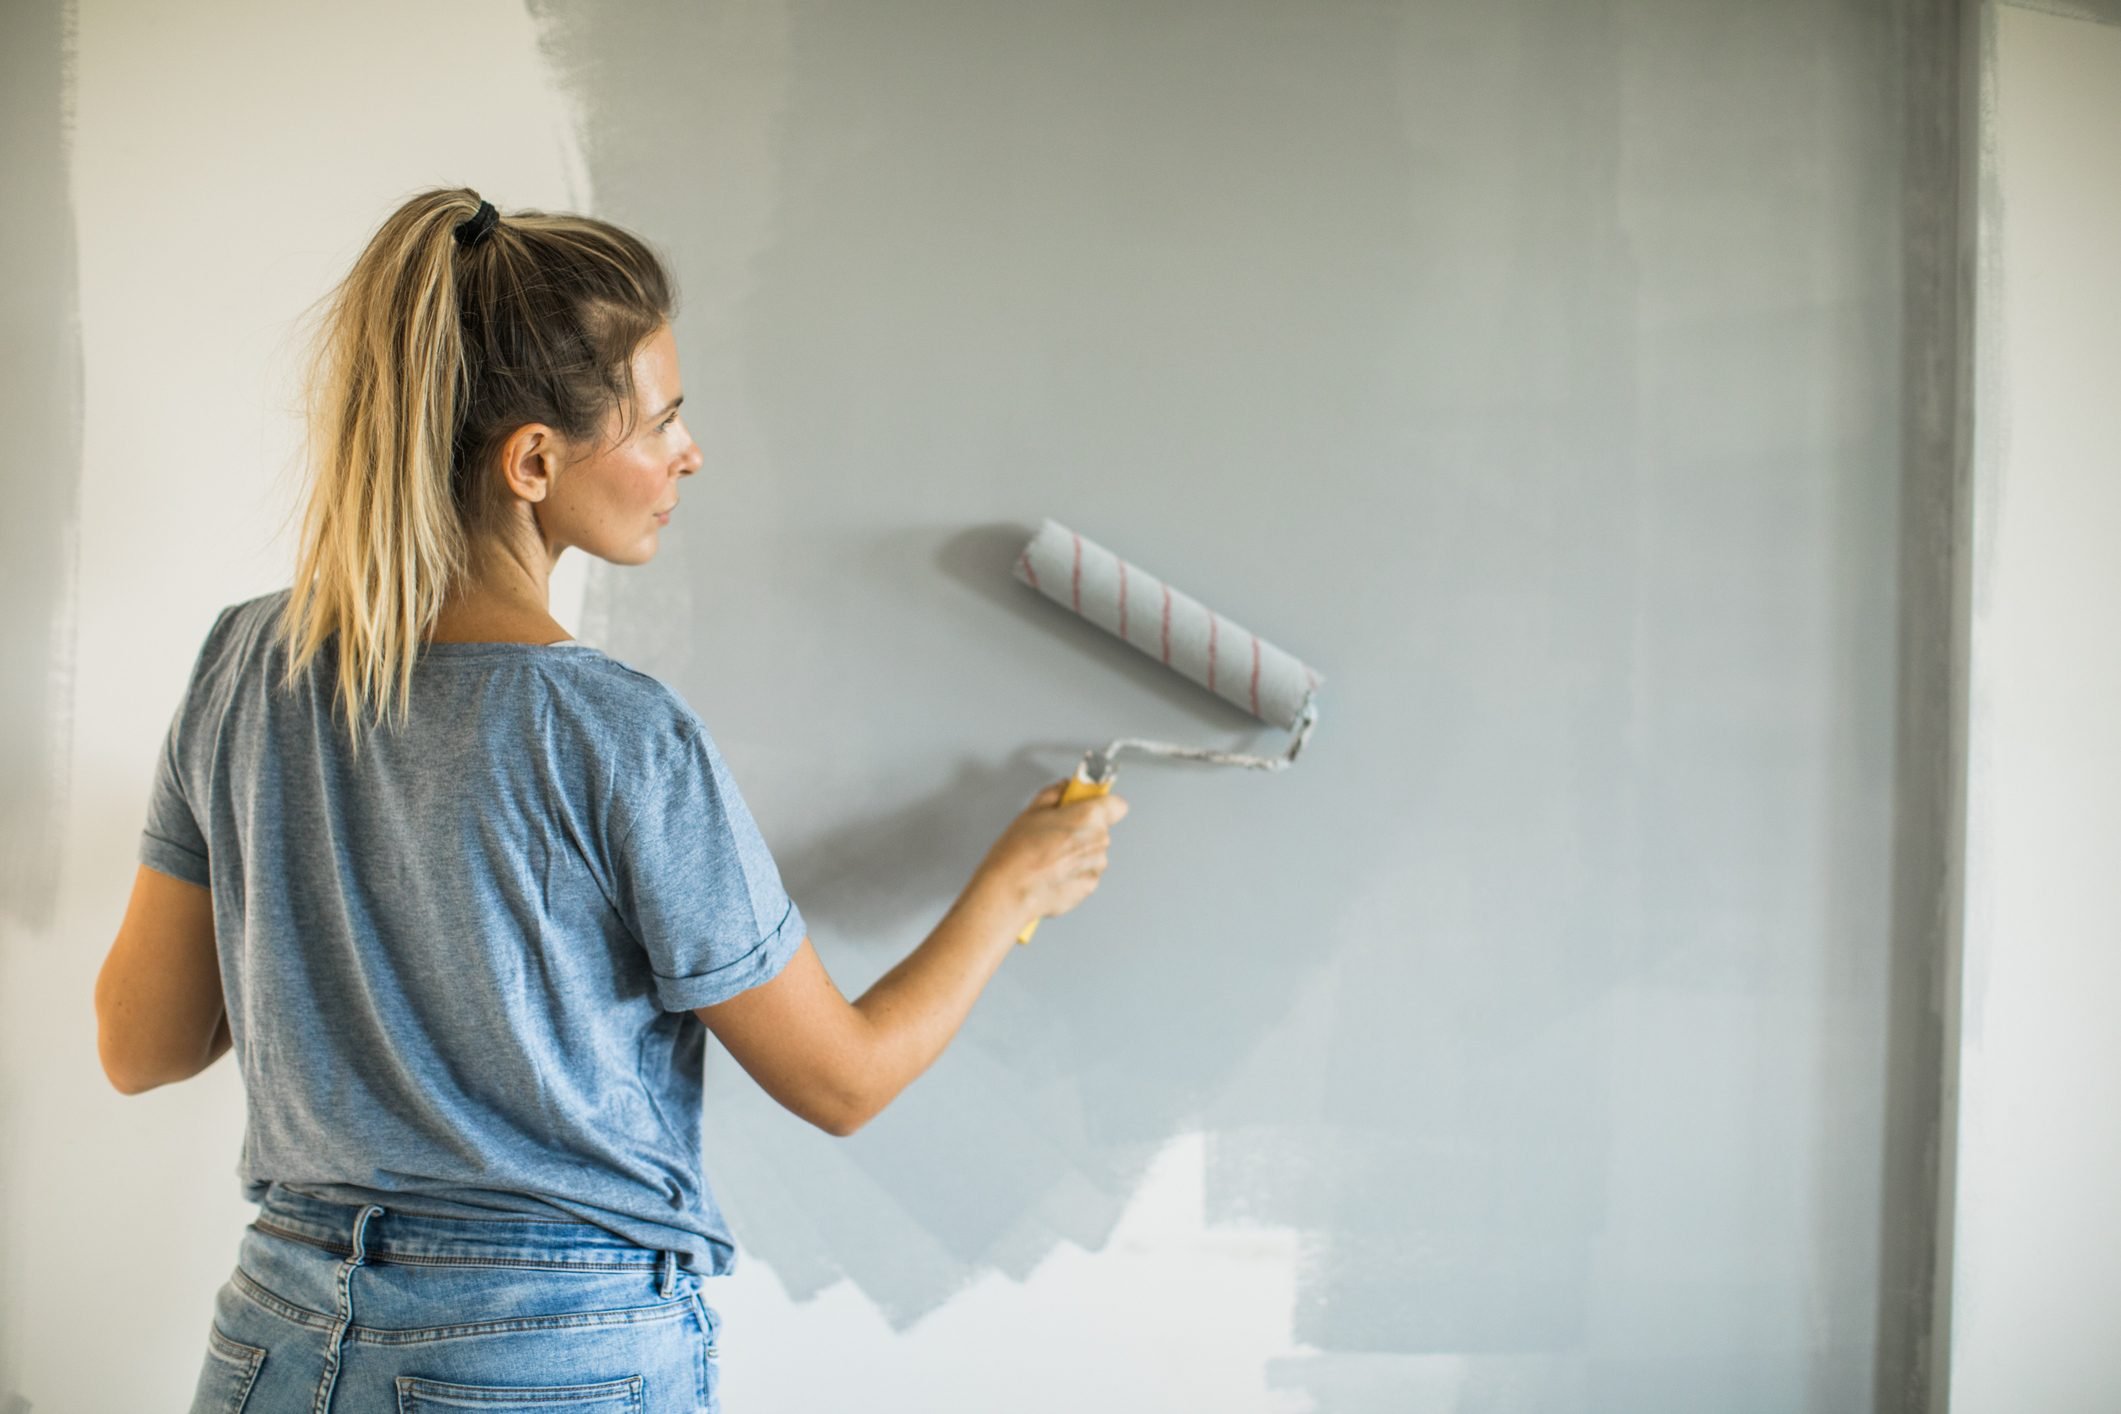 7 Best Paint Rollers for Walls, Cabinets and Ceilings 2023